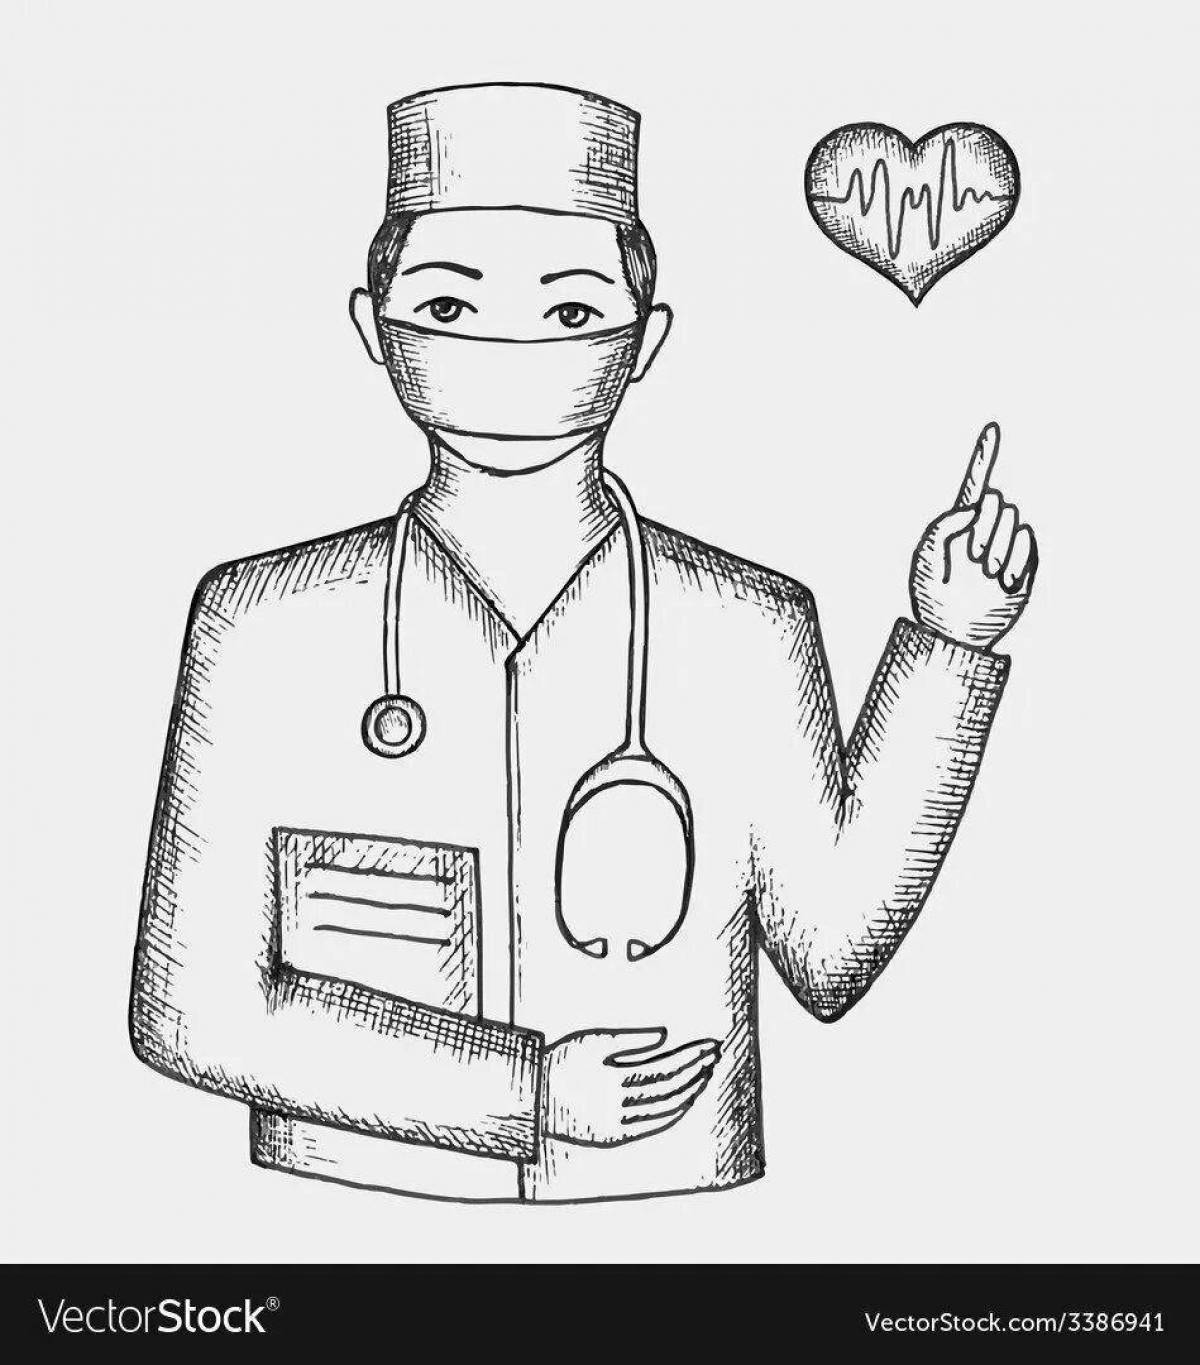 Outstanding surgeon coloring page for kids